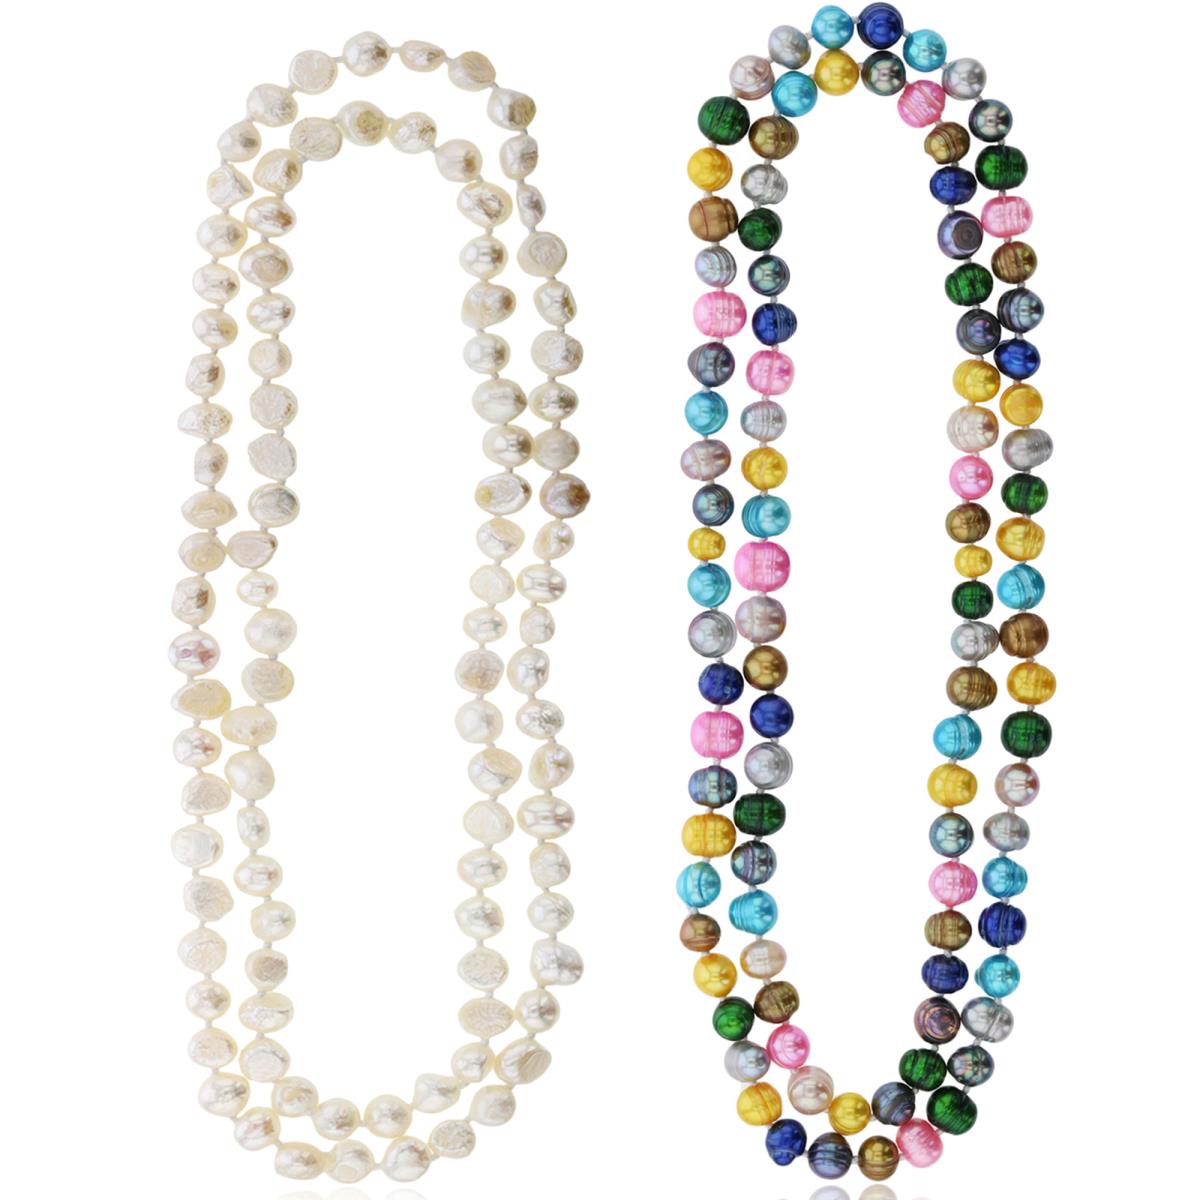 8-9mm Semi Baroque Multi Color & White Fresh Water Pearl 60" Endless Necklace Set